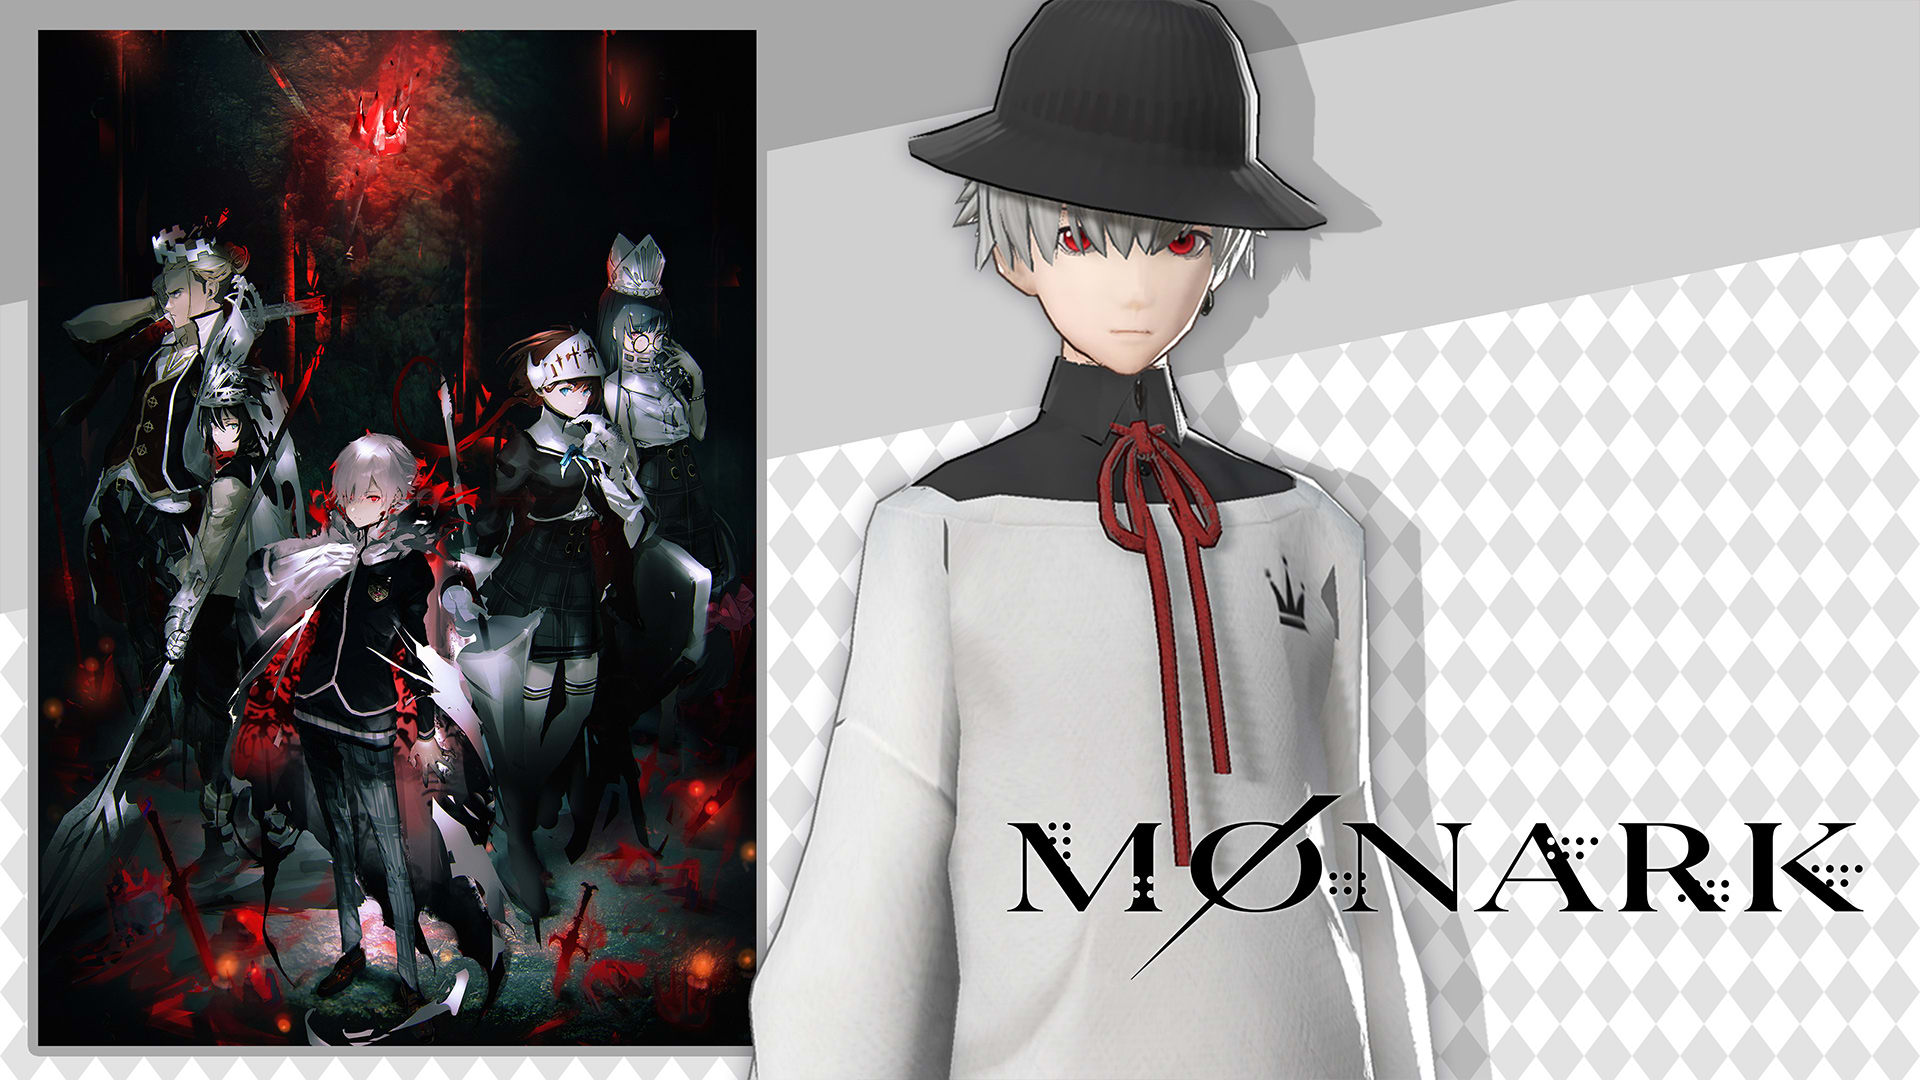 MONARK: Protagonist's Casual Outfit